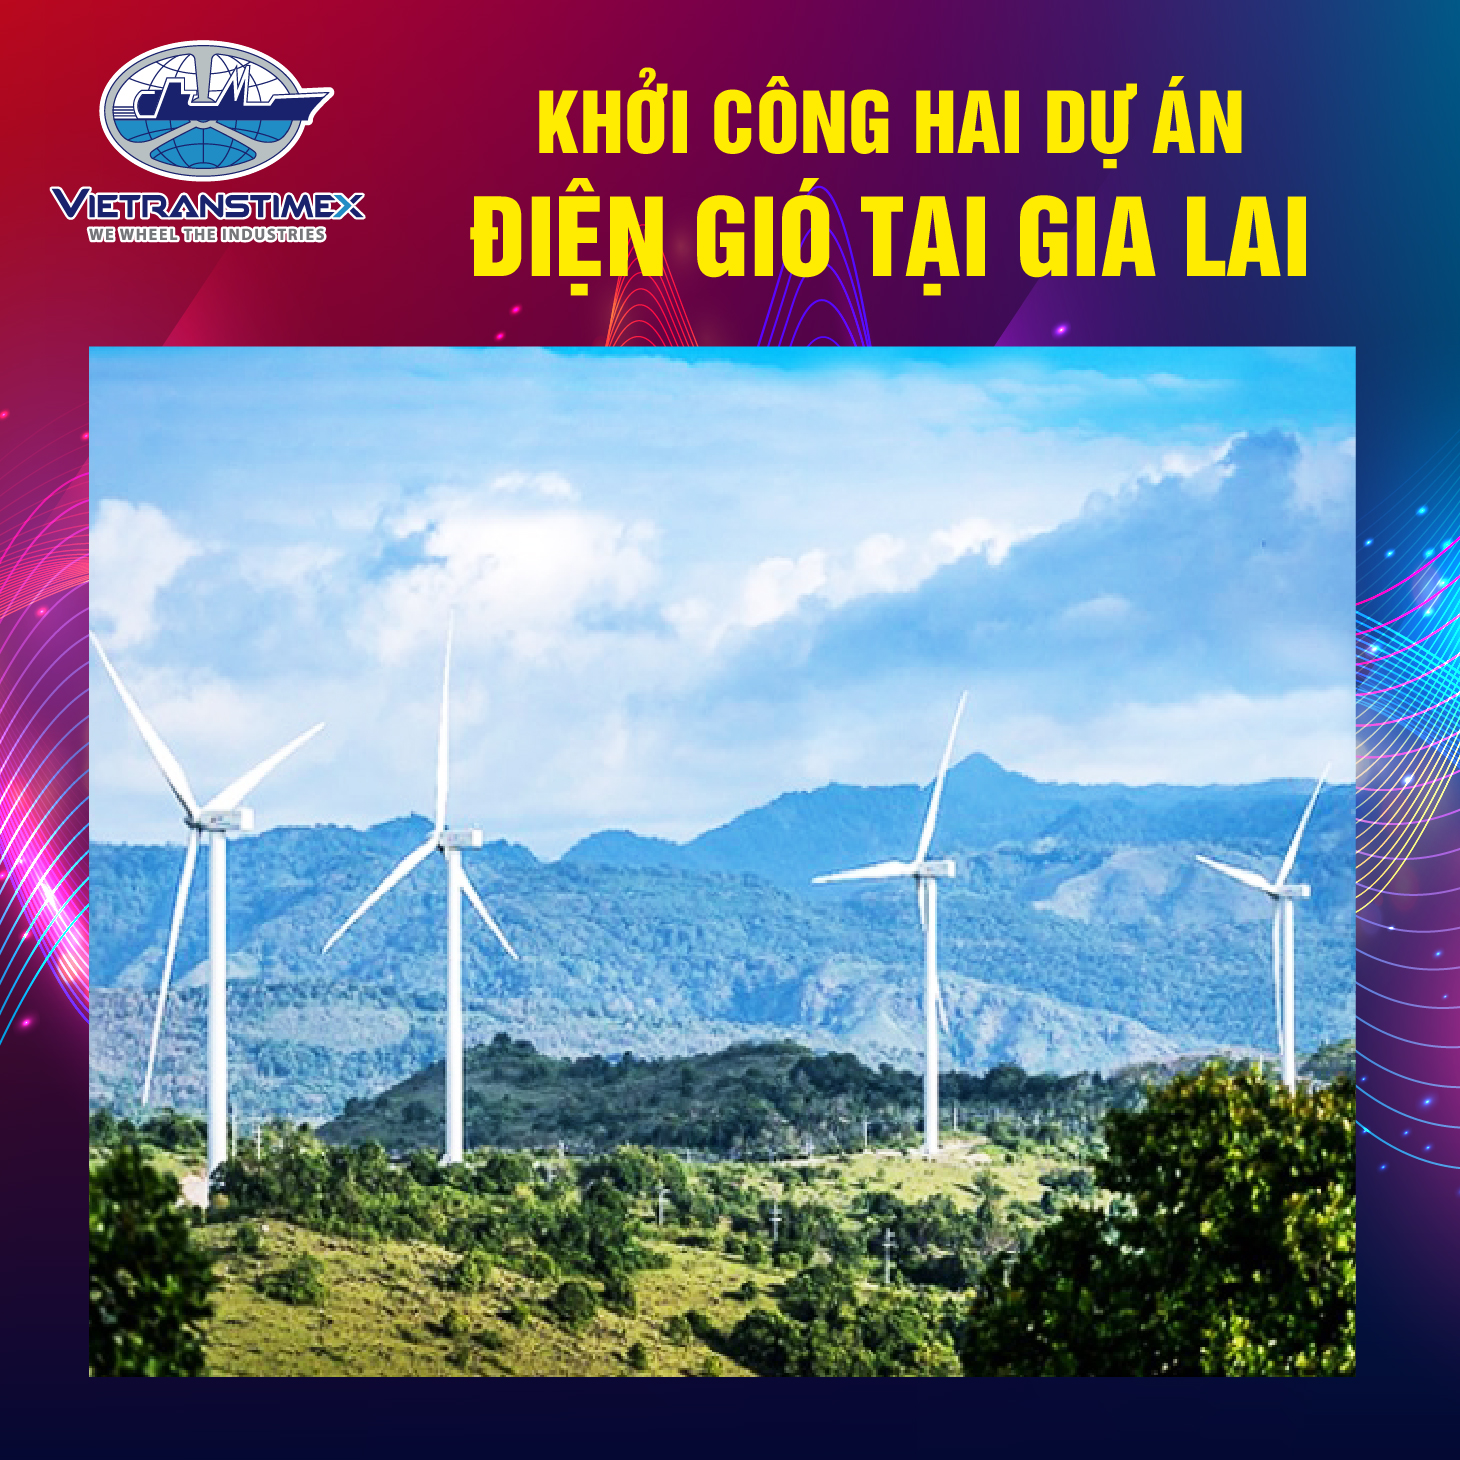 Construction Starts On Two Wind Farms In Gia Lai Province